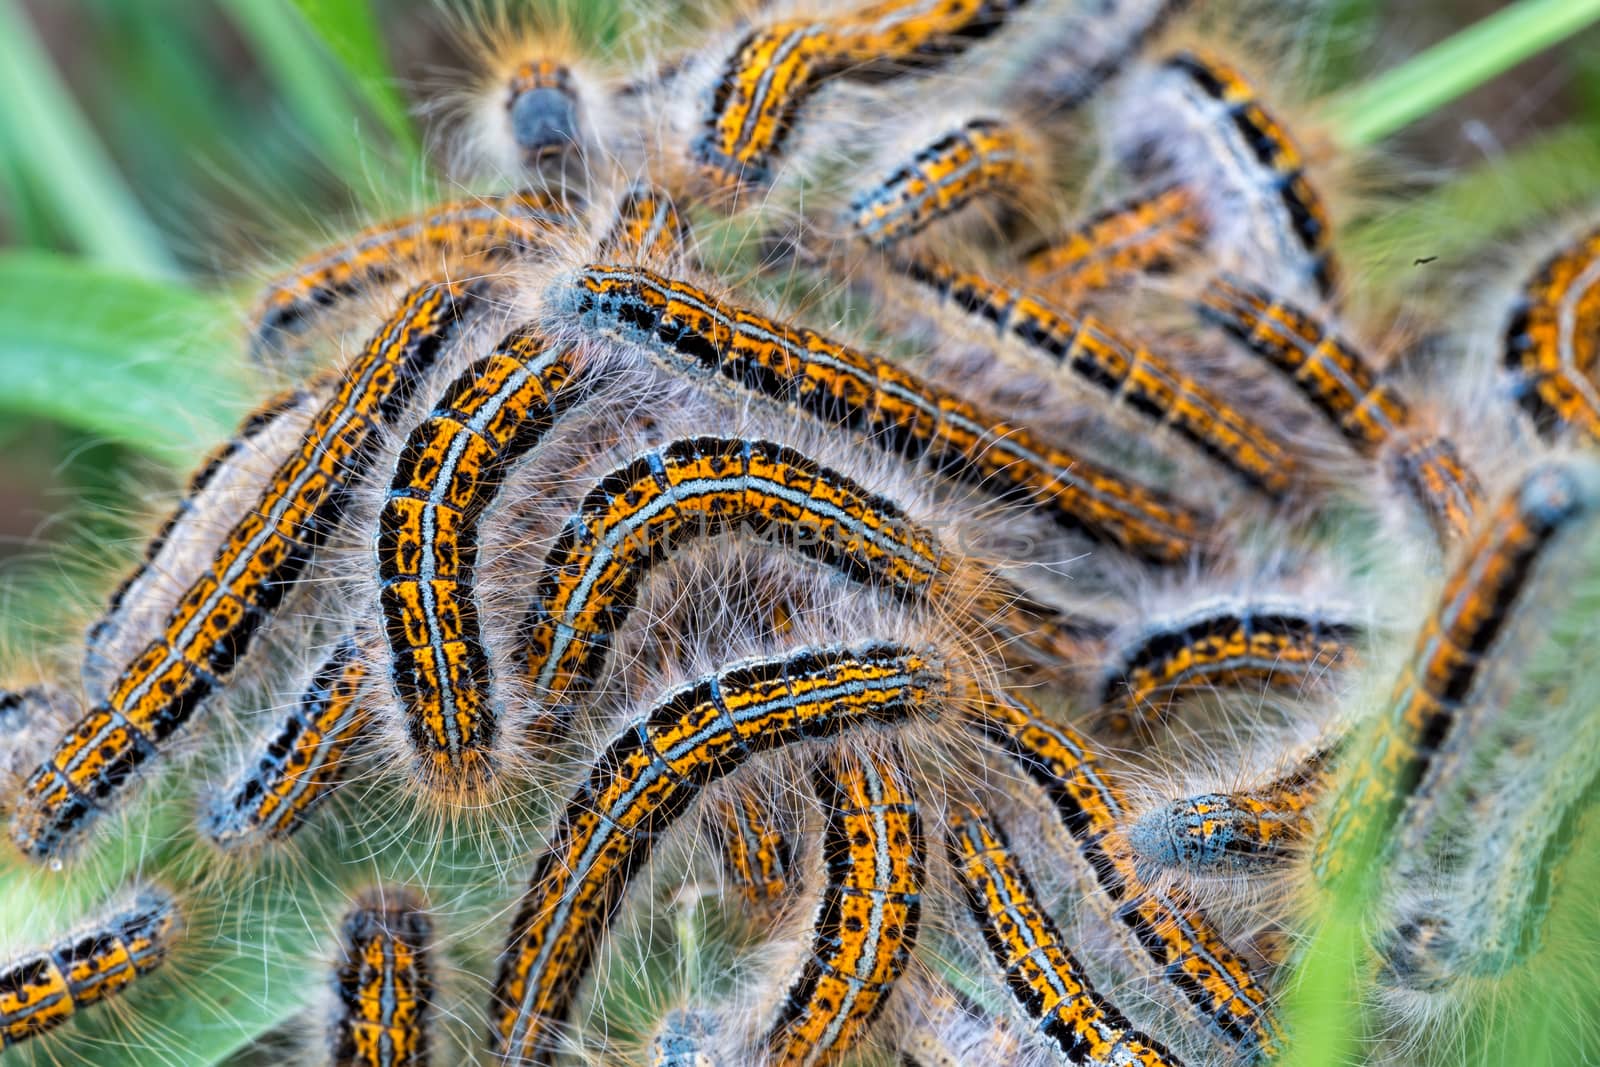 Young caterpillars in the nest (Lymantria dispar) by Digoarpi